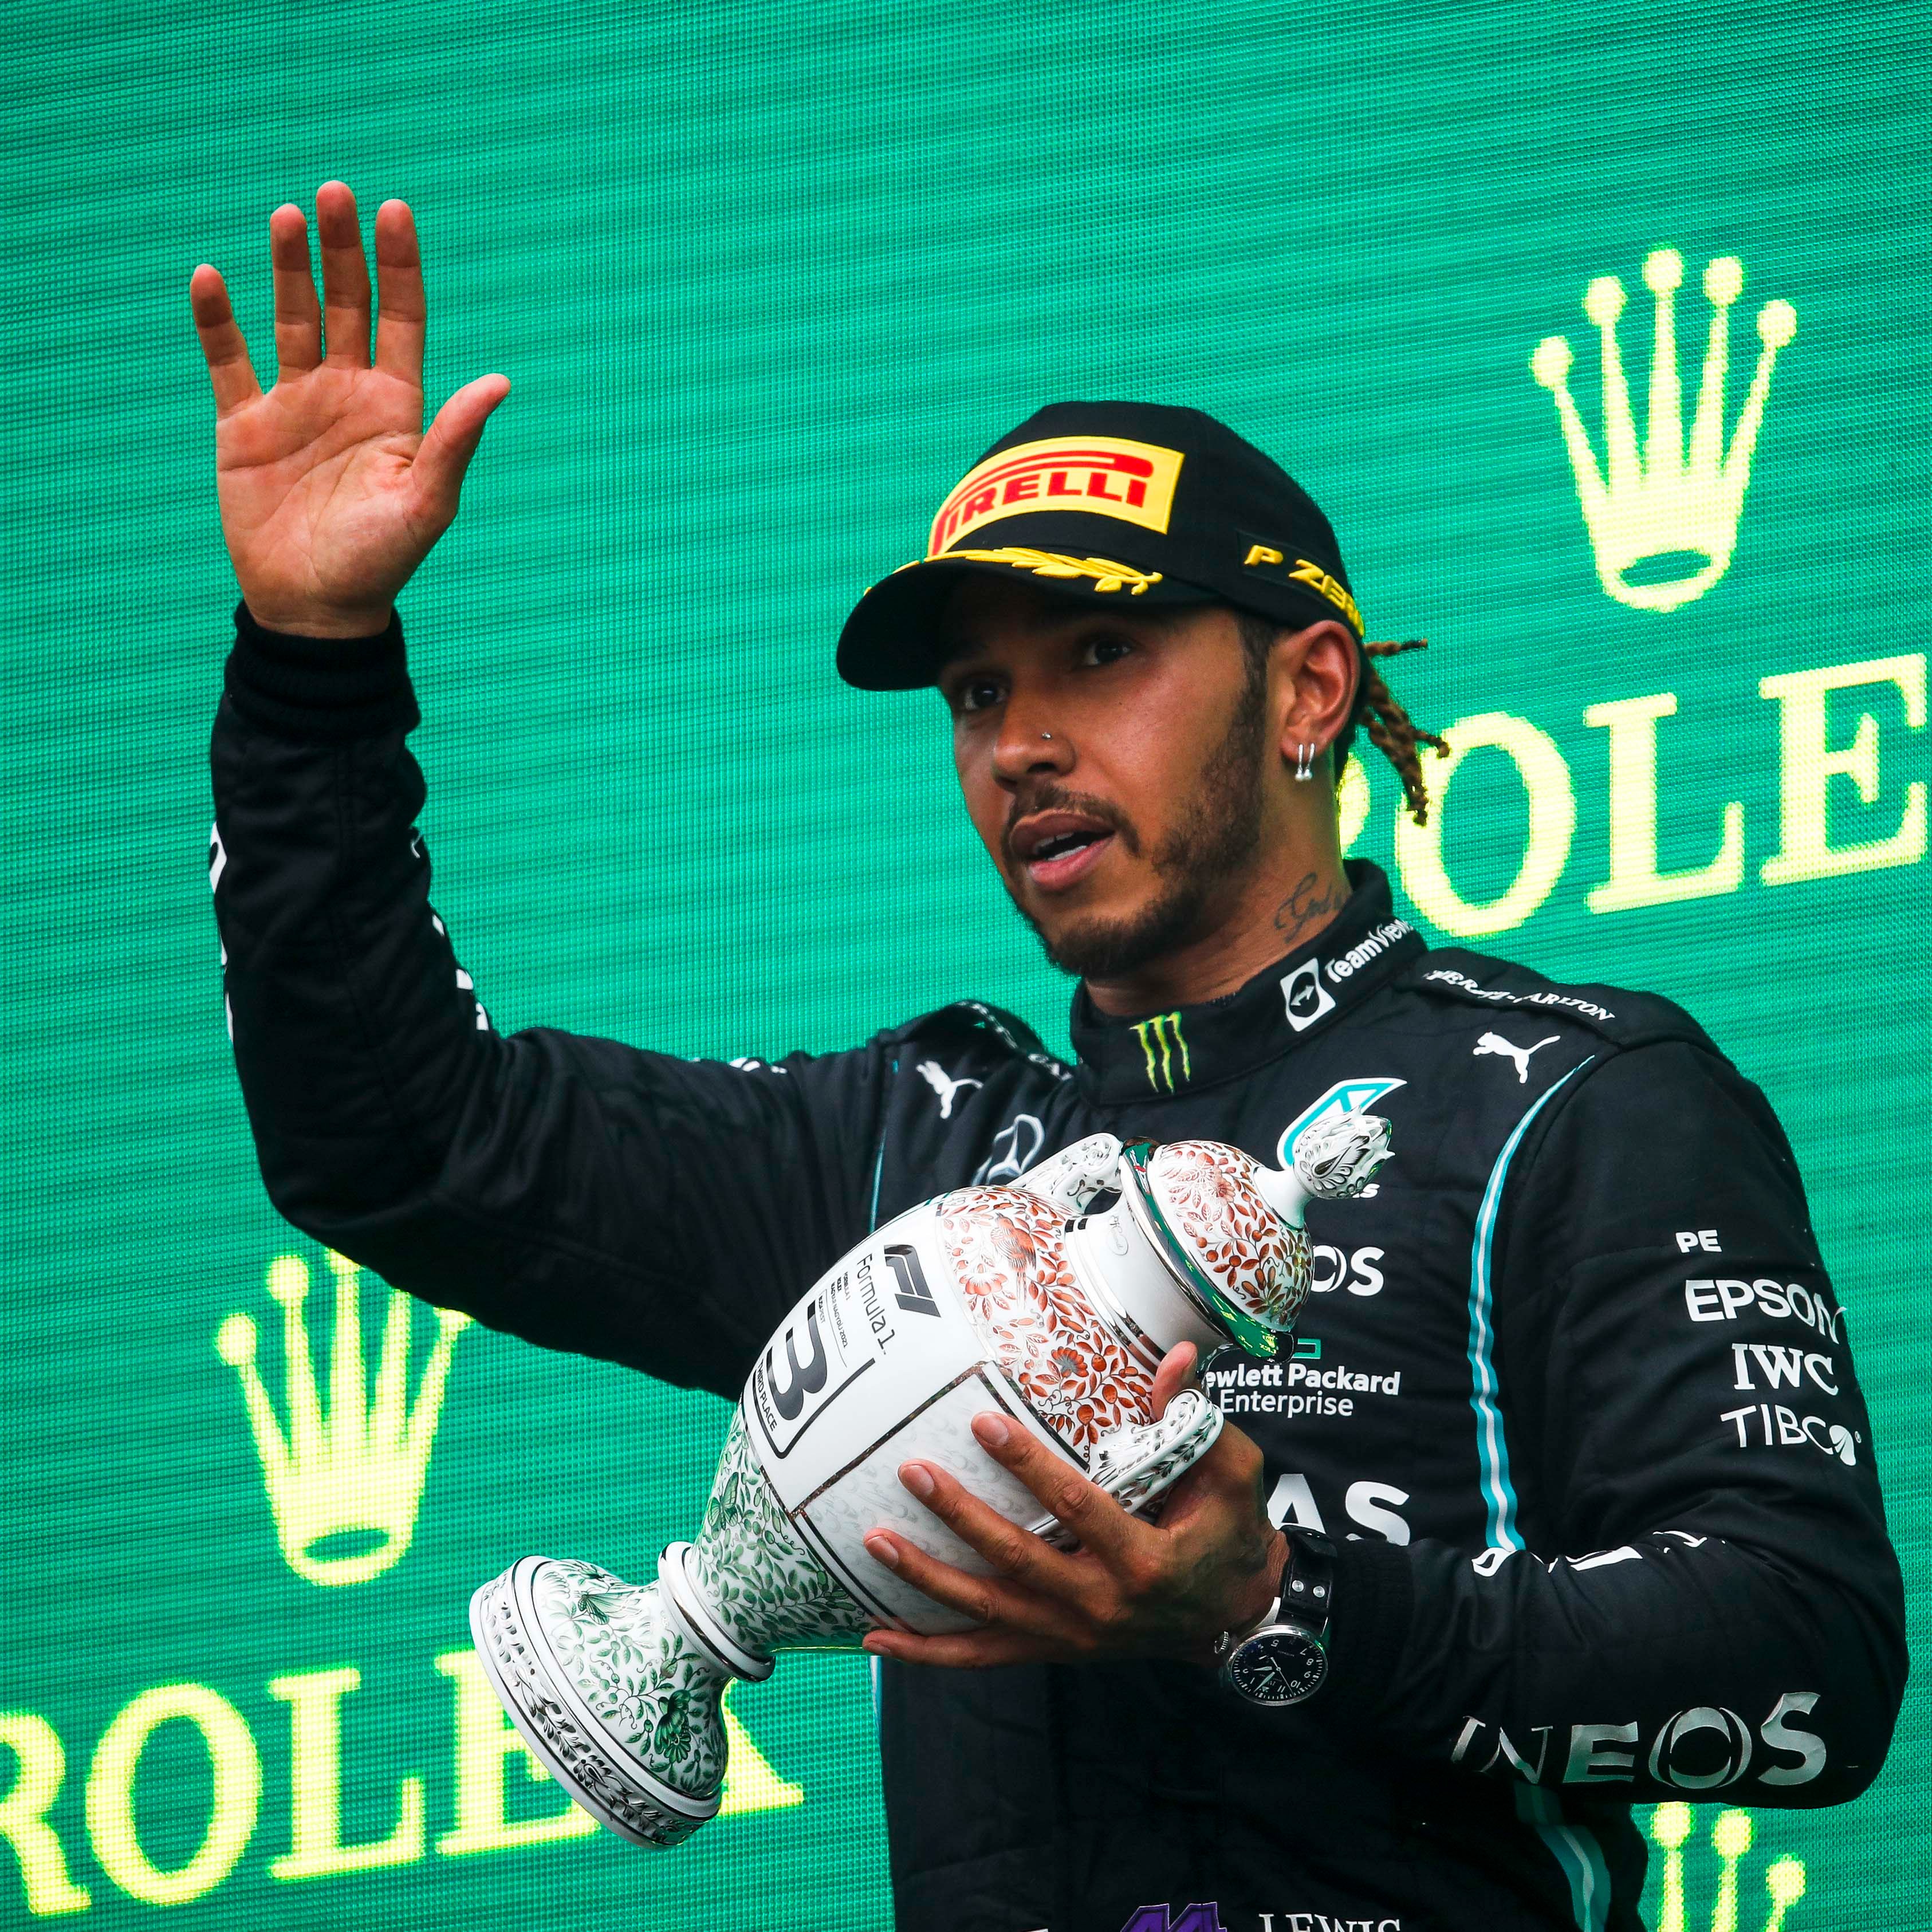 Lewis with Hungarian GP trophy